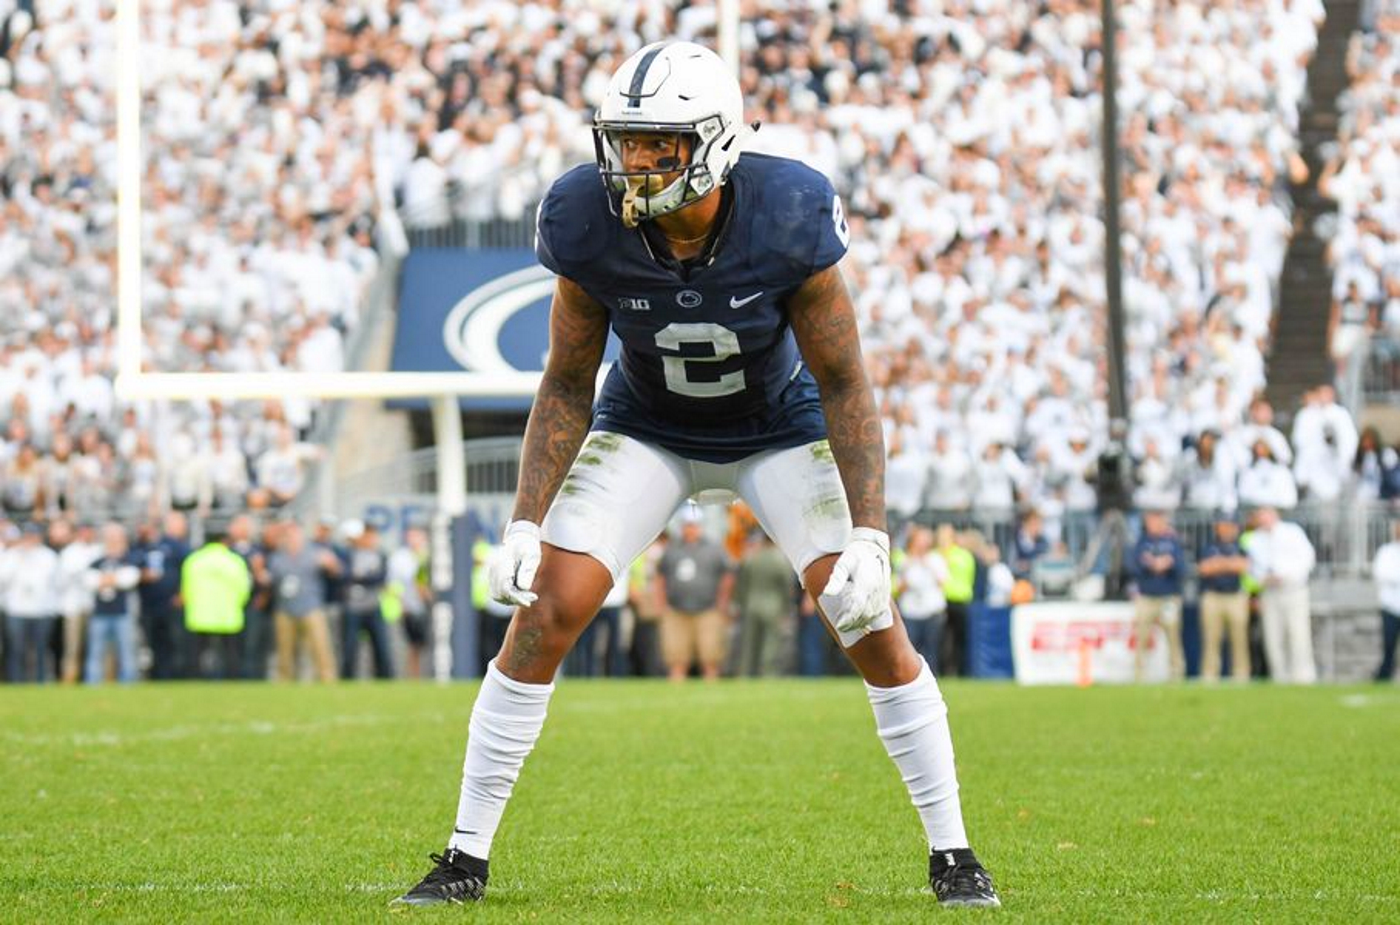 Penn State's Marcus Allen becomes Steelers' first pick in fifth